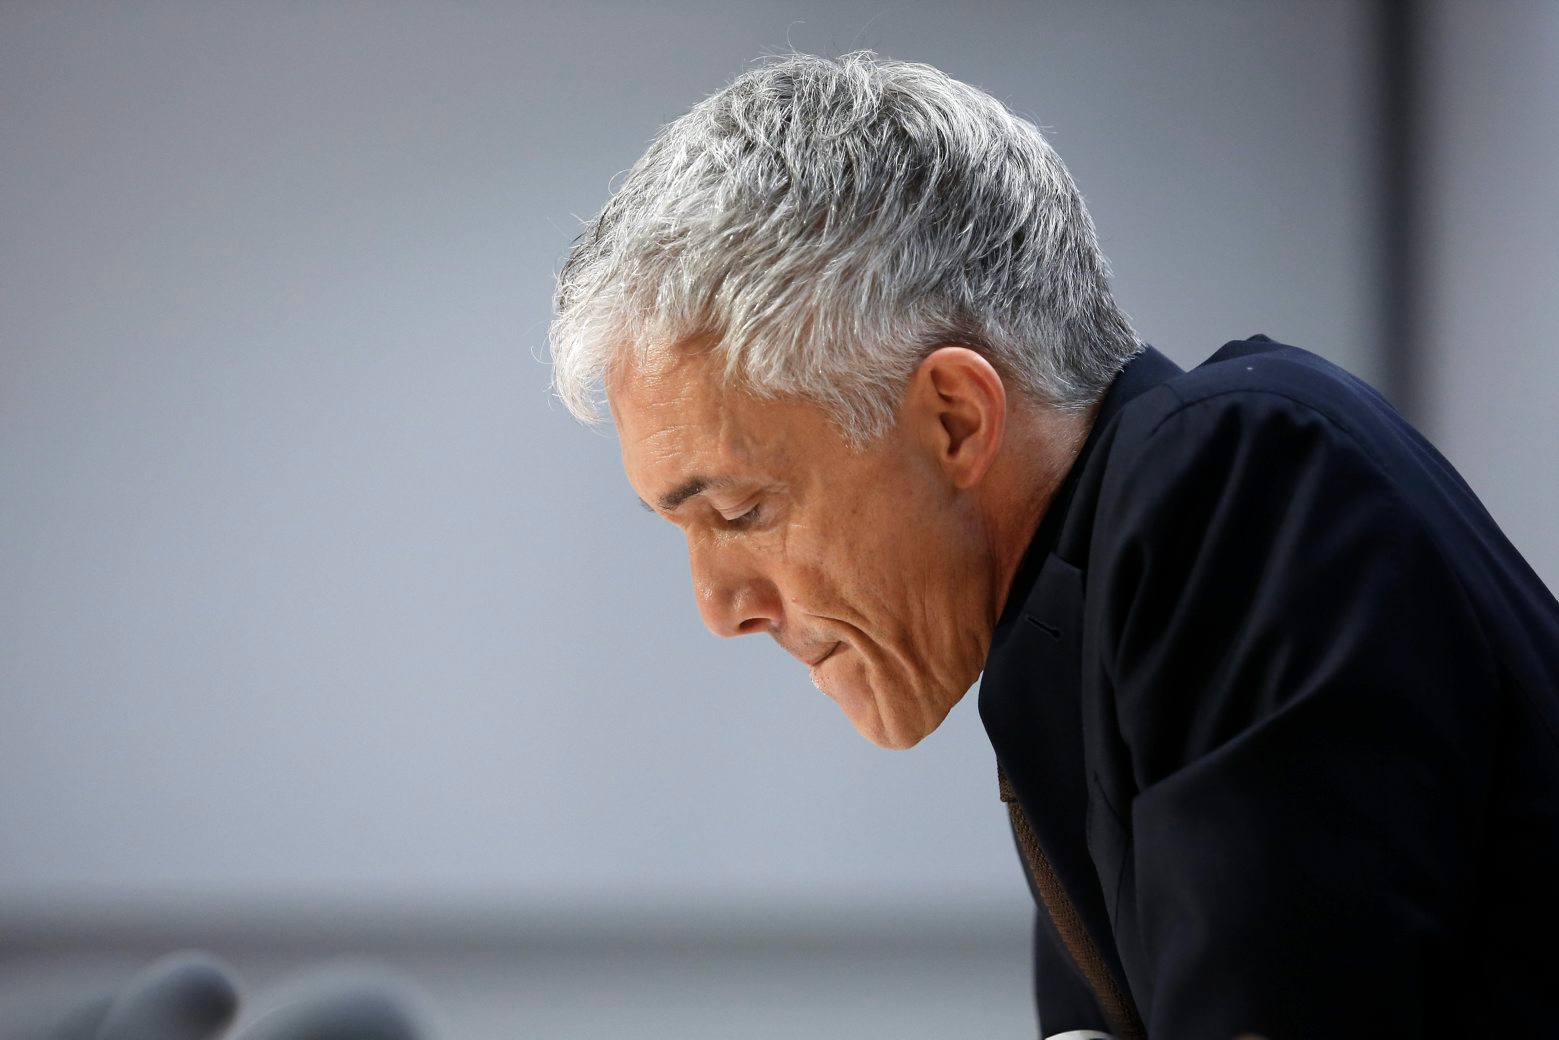 Swiss Federal Attorney Michael Lauber reacts during a media conference at the Media Centre of the Federal Parliament in Bern, Switzerland, on Friday, 10 May 2019. Federal Attorney Michael Lauber is criticised for informal meetings with FIFA head Gianni Infantino. The supervisory authority for the Federal Prosecutor's Office is opening a disciplinary investigation against Lauber. (KEYSTONE/Peter Klaunzer) SCHWEIZ BUNDESANWALTSCHAFT LAUBER